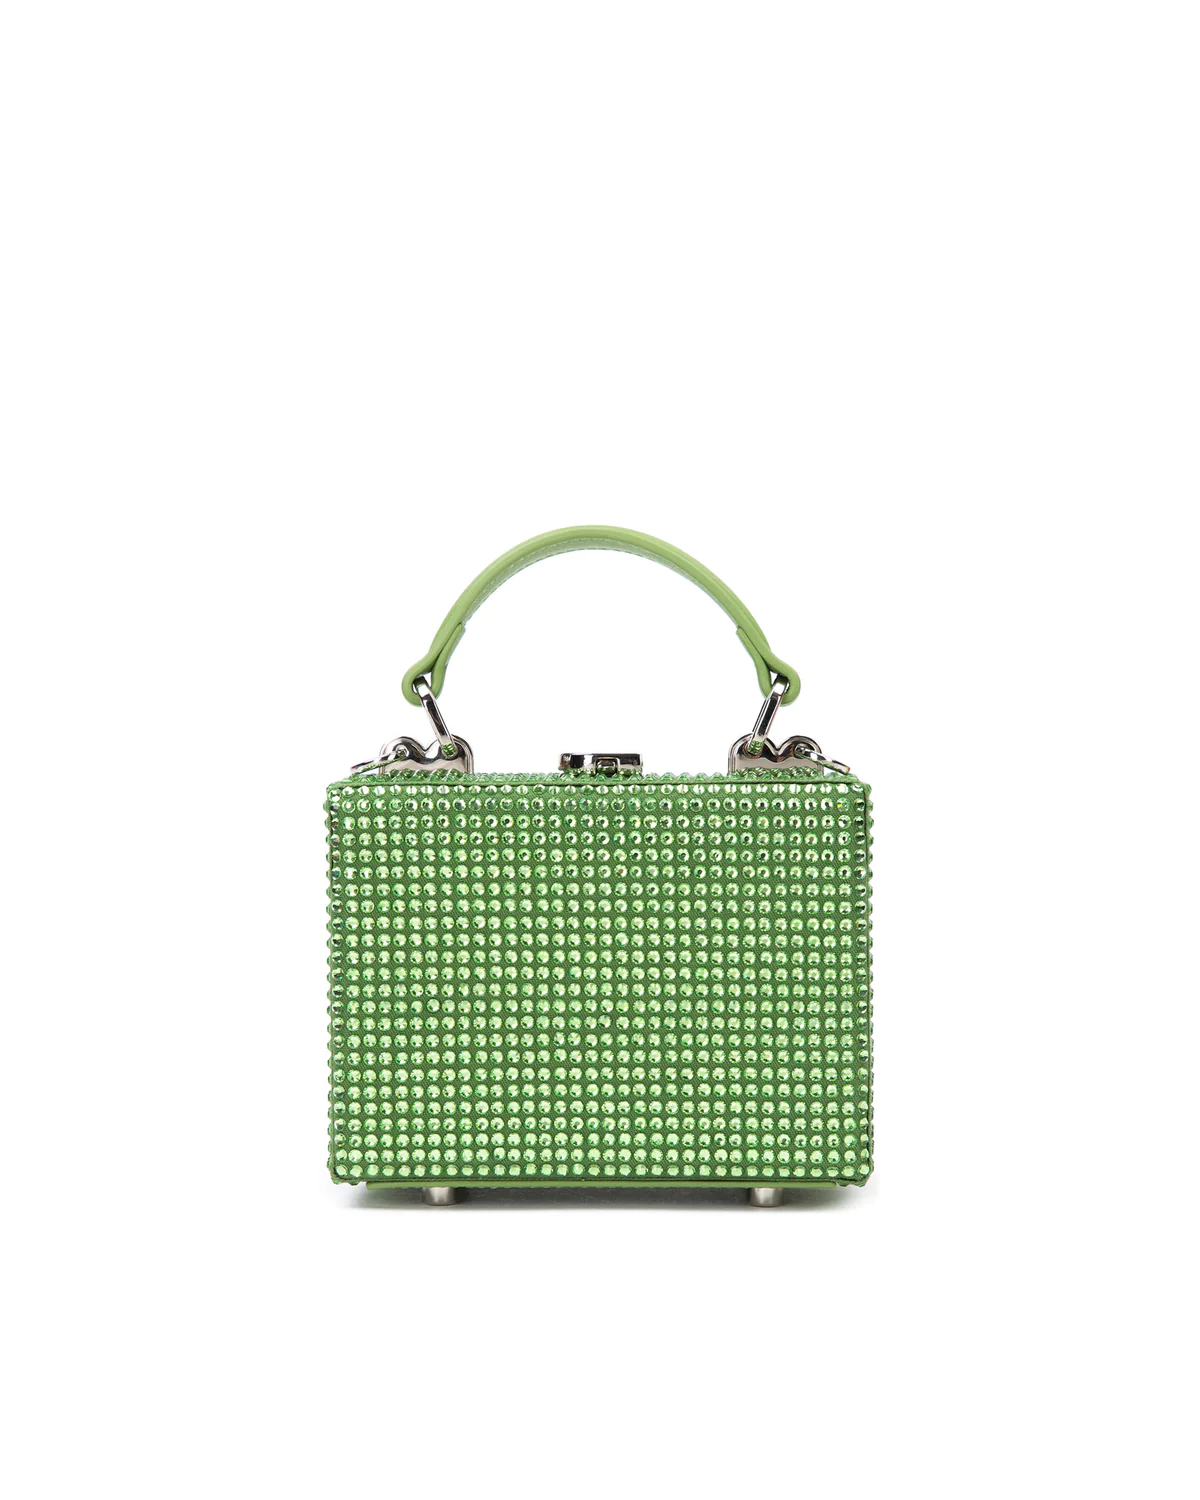 These Trendy Handbags Are Snag-Worthy For Spring